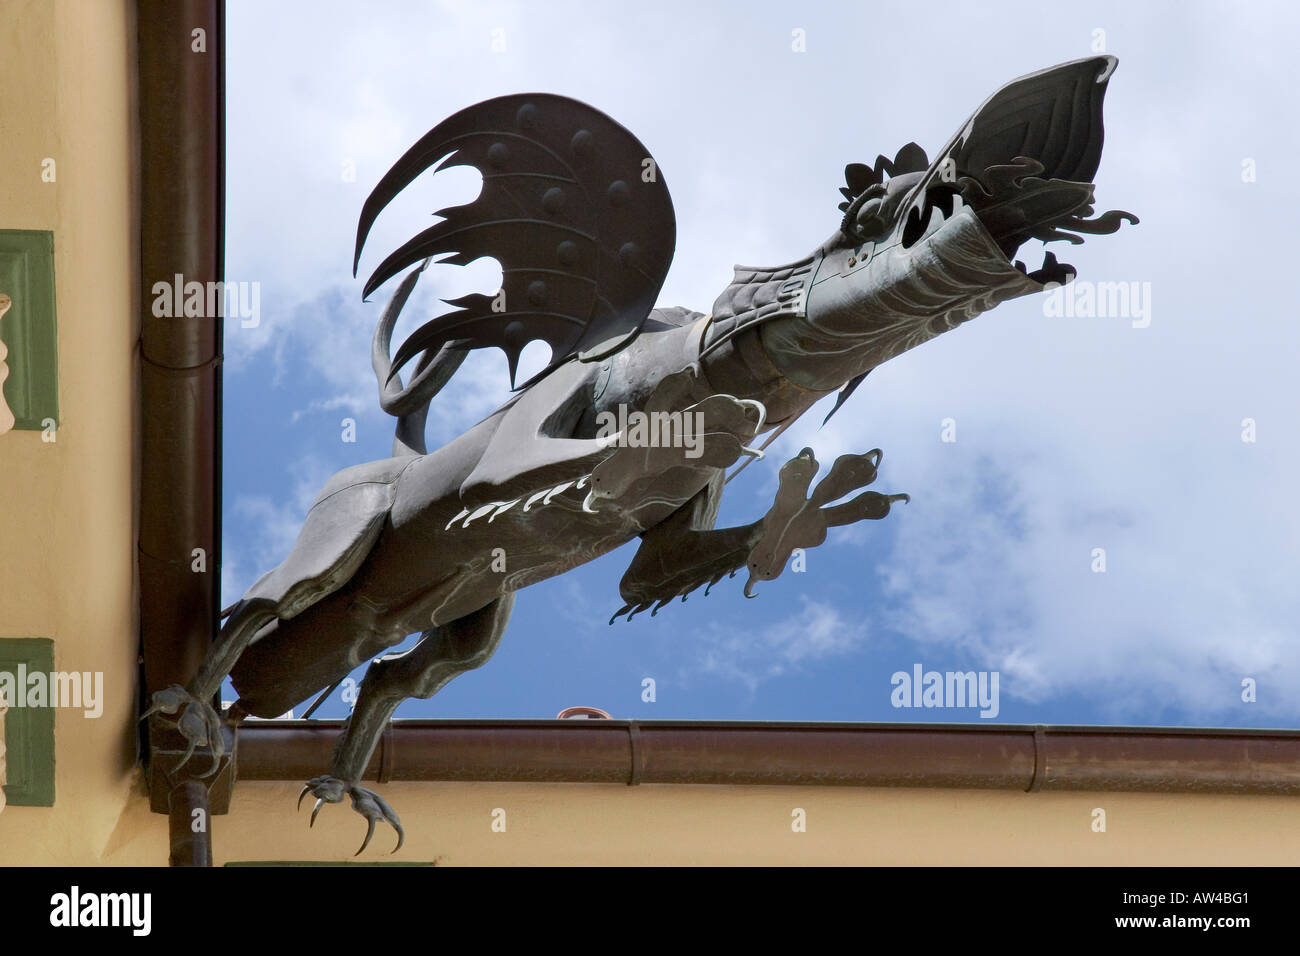 Brno Dragon Czech Republic High Resolution Stock Photography and Images -  Alamy